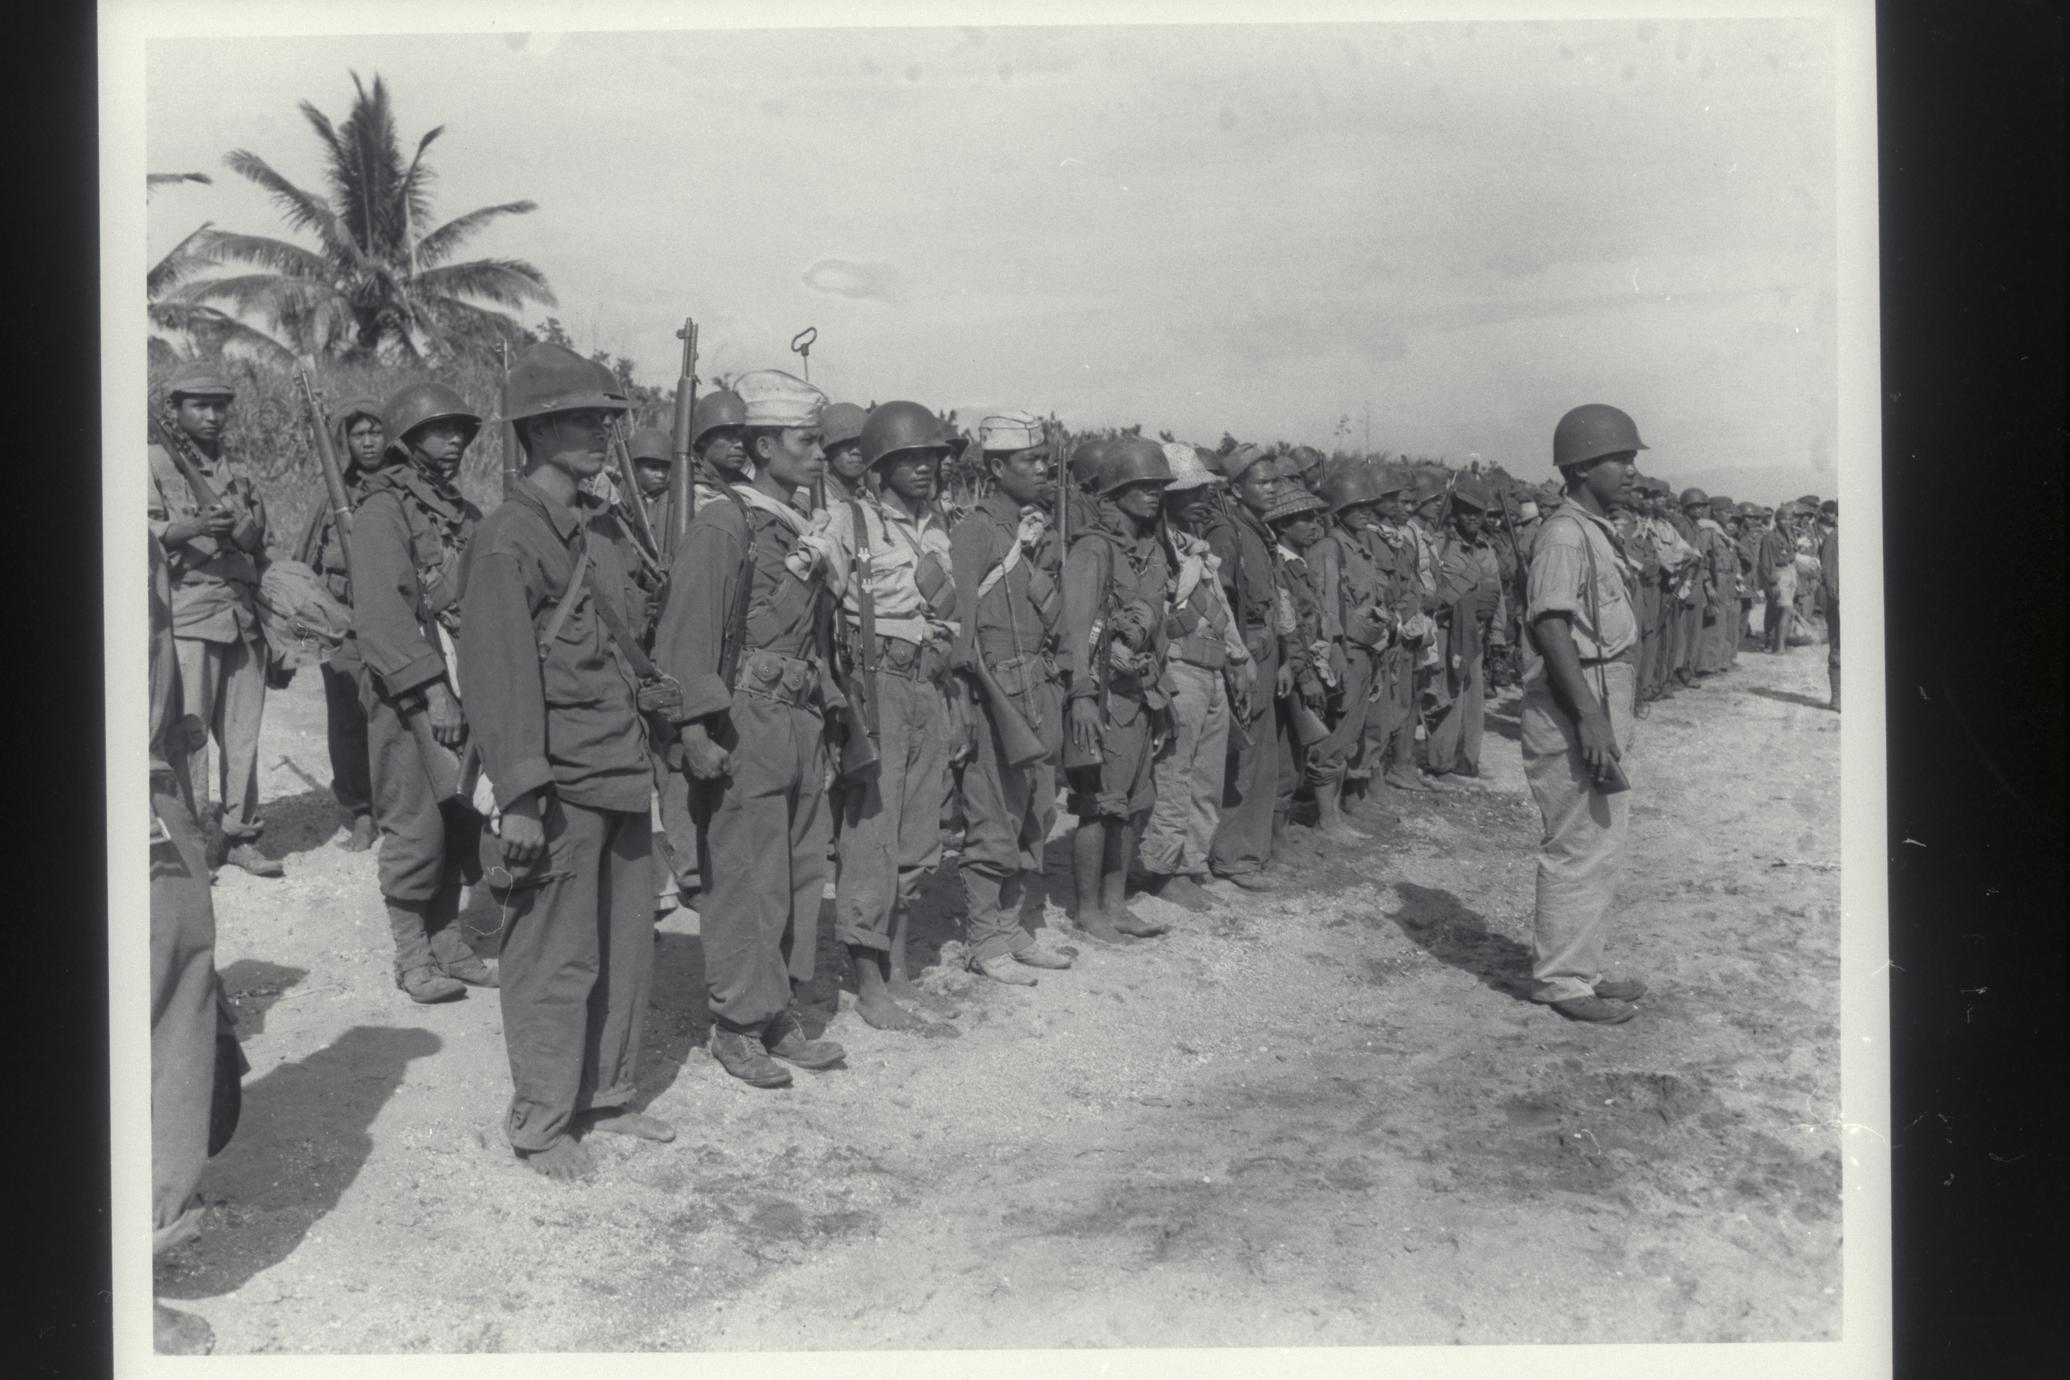 Guerrillas stand in formation on beach, Masbate, 1945